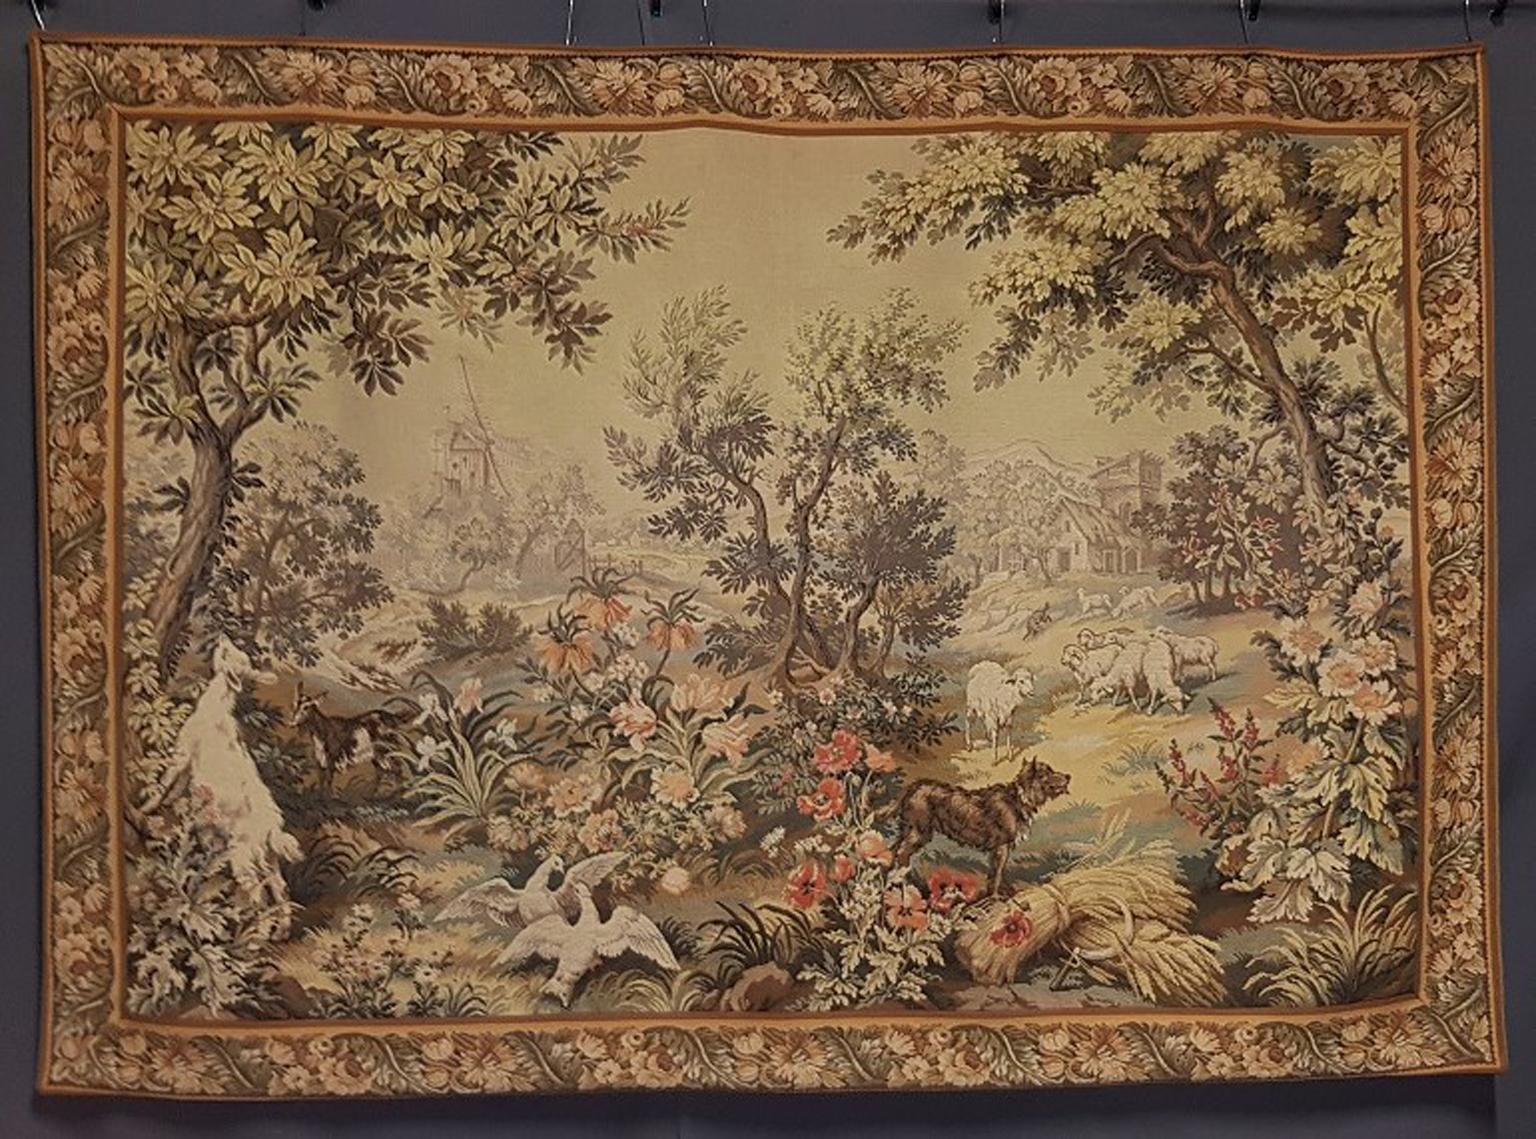 Hand-Woven Beautiful Large Tapestry Rug Carpet, France, 19th Century